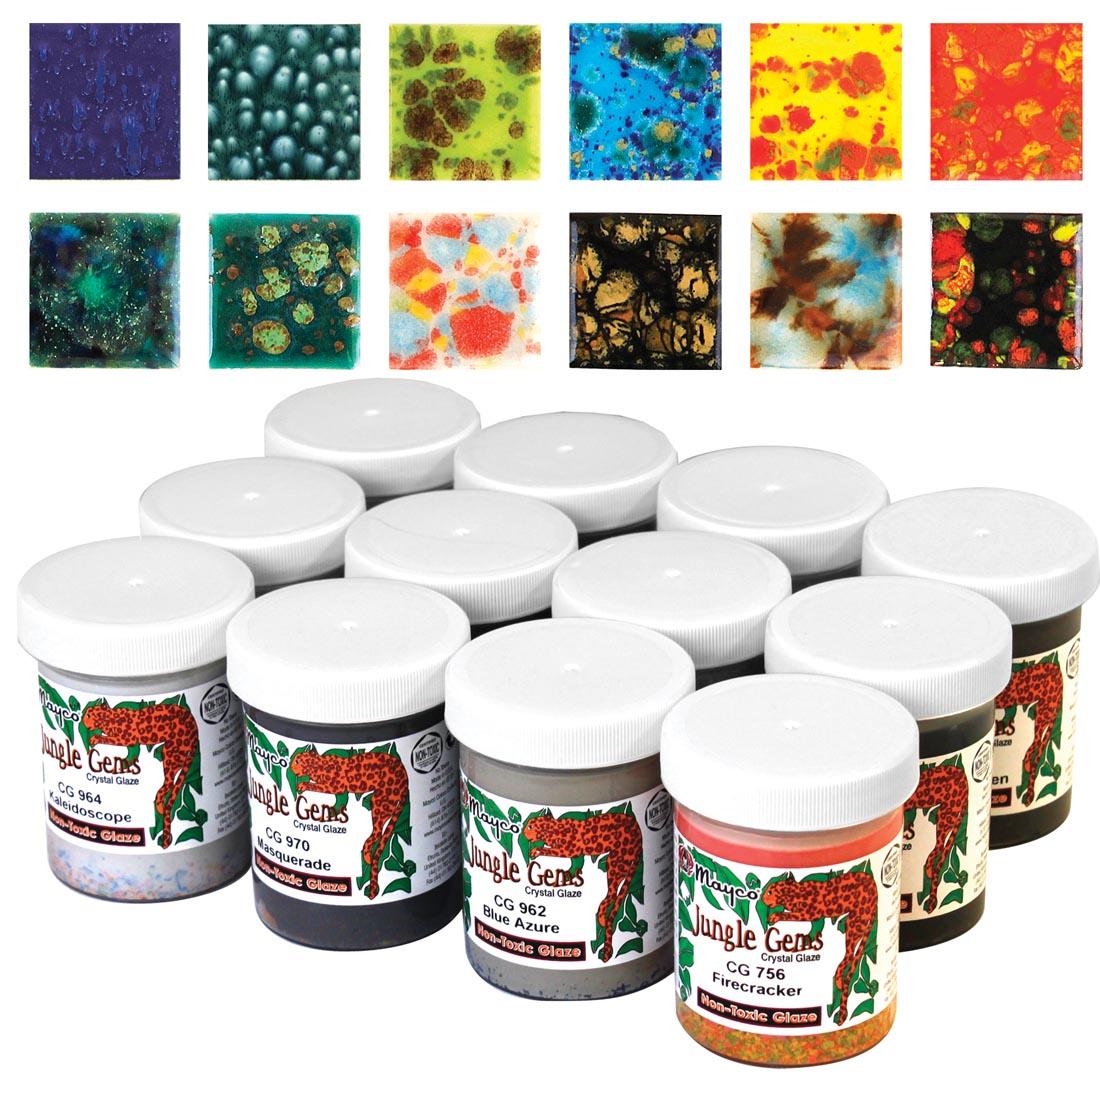 12 Jars from the Mayco Jungle Gems Crystal Glaze Set along with sample tiles of each color